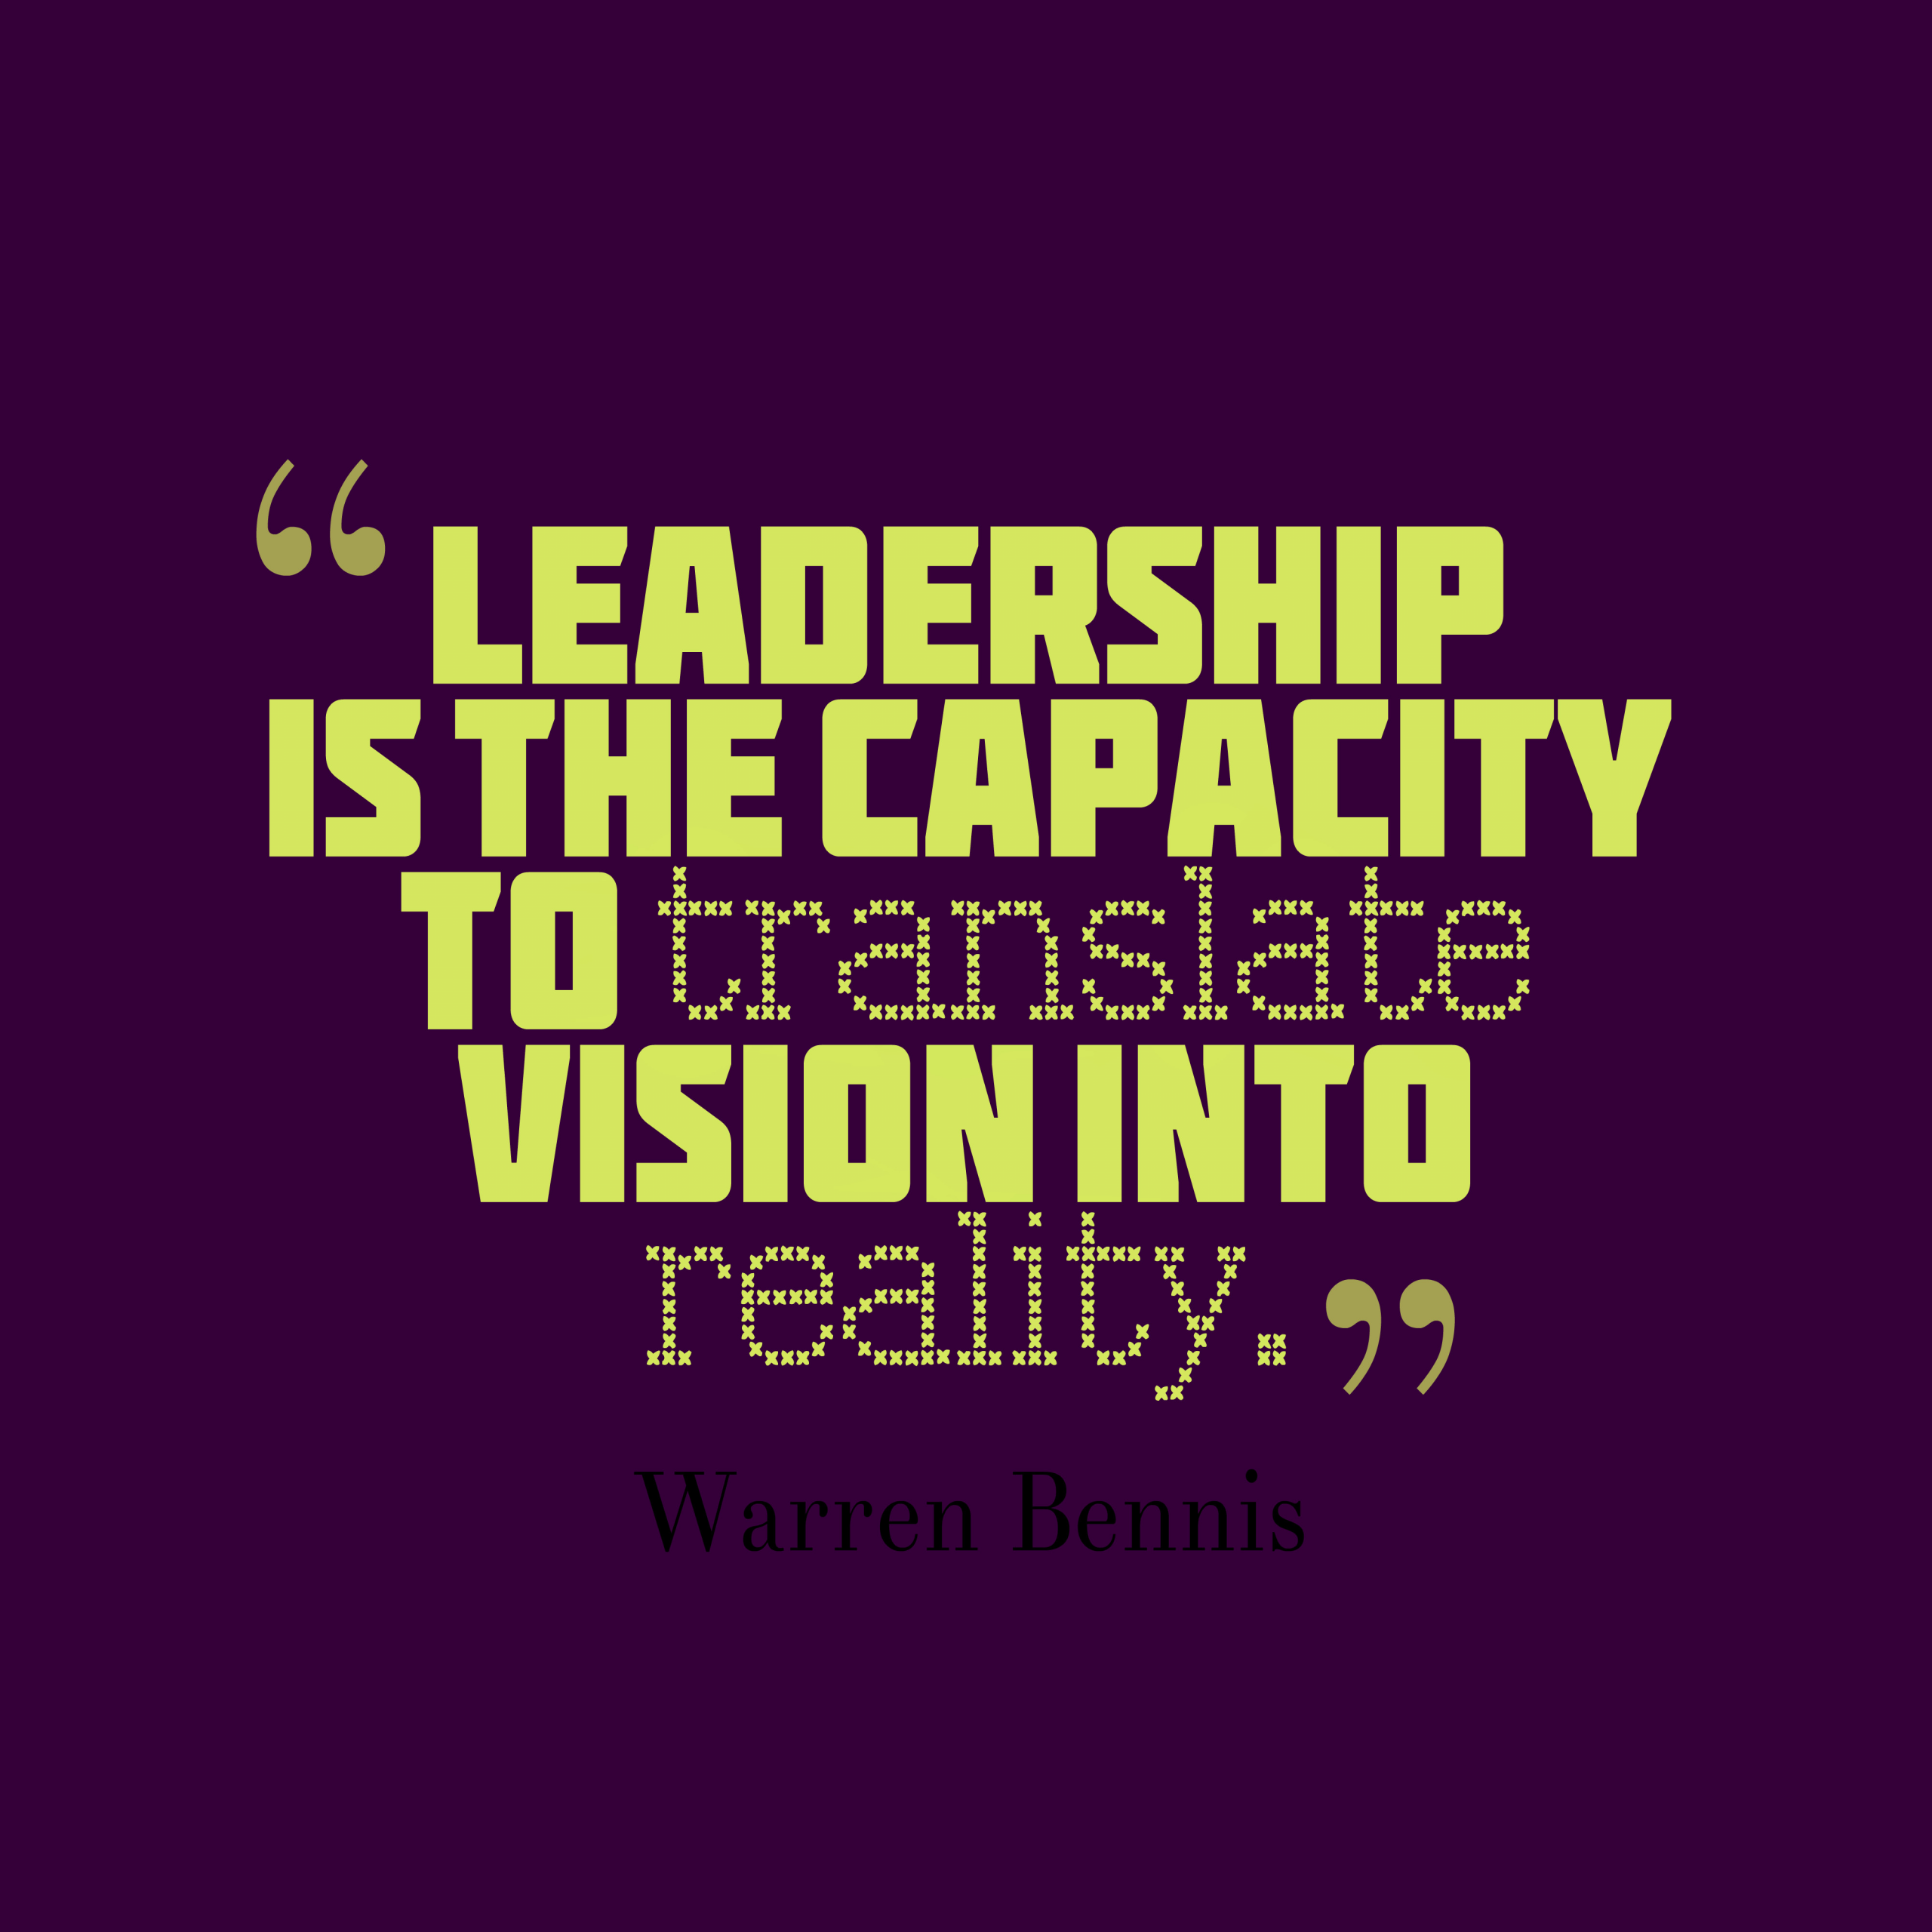 Motivational Leadership Quote
 20 Best Leadership Quotes We Need Fun